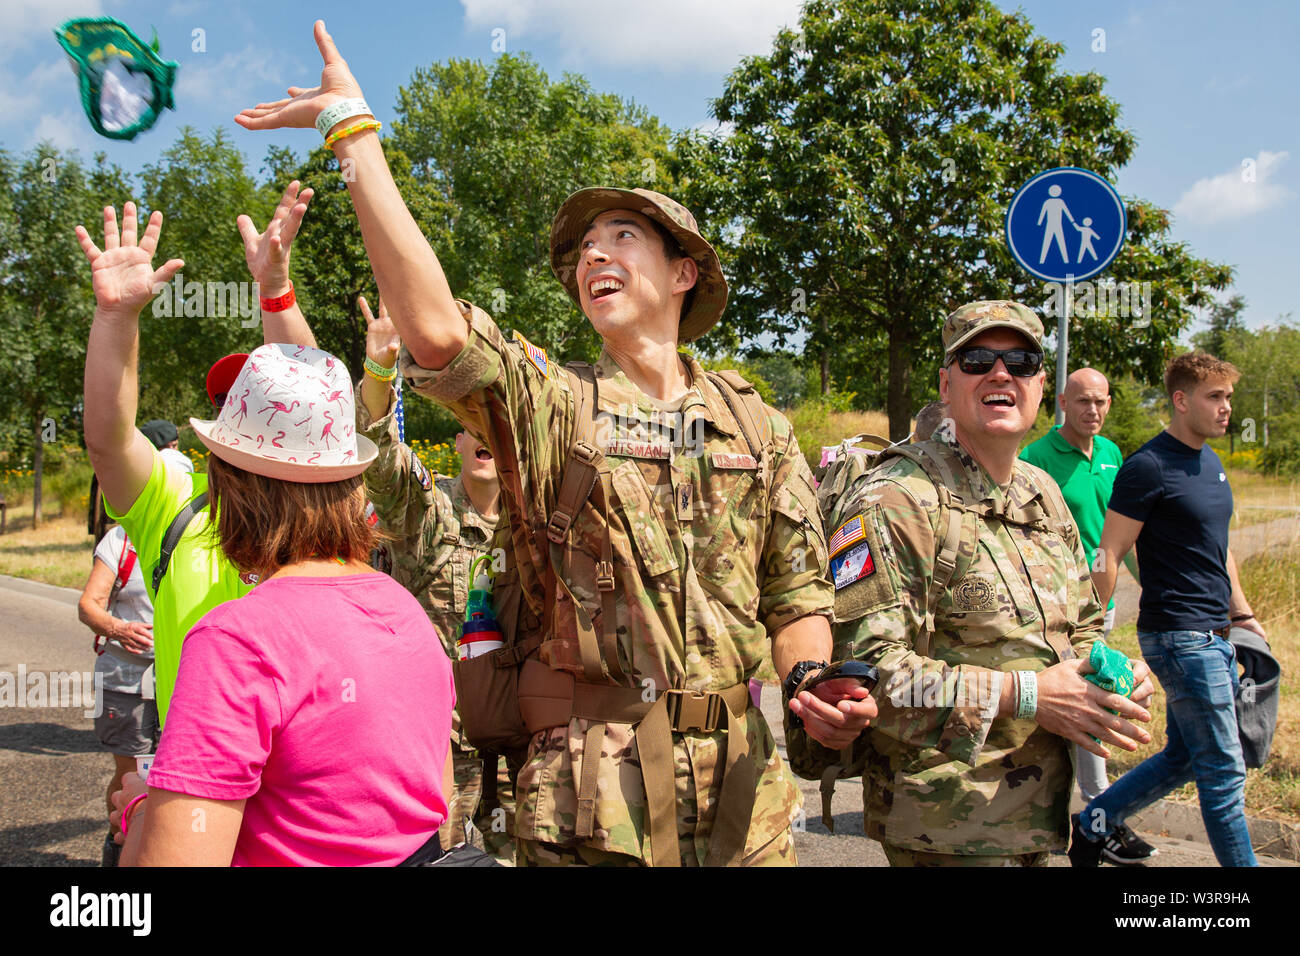 17-07-2019: 2nd day of the Vierdaagse of Nijmegen, Wijchen, Pink Wednesday Credit: Pro Shots/Alamy Live News Stock Photo